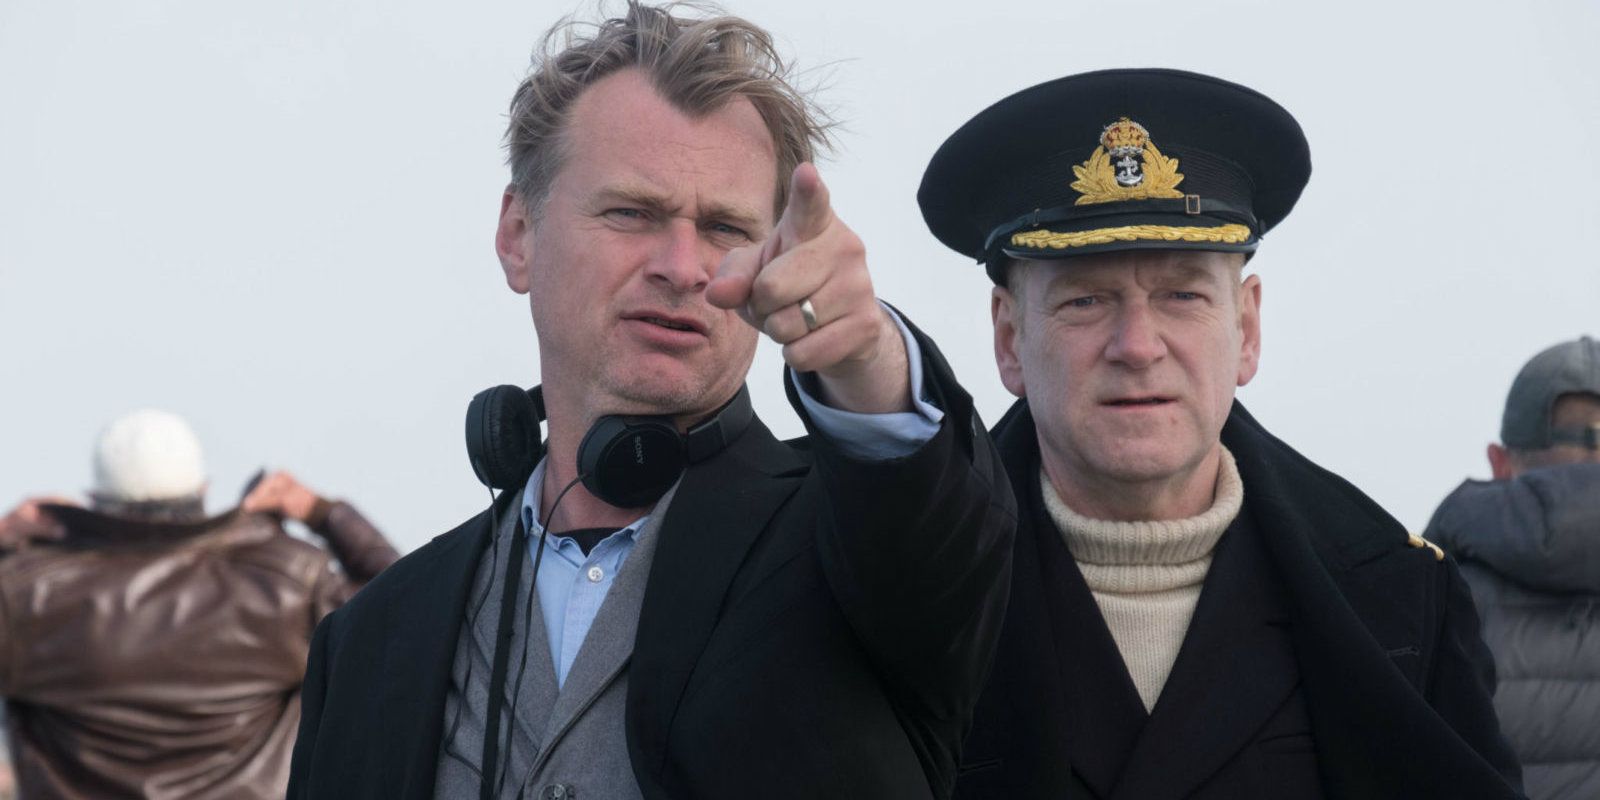 Christopher Nolan’s Next Movie Title, Release Date & Star Revealed